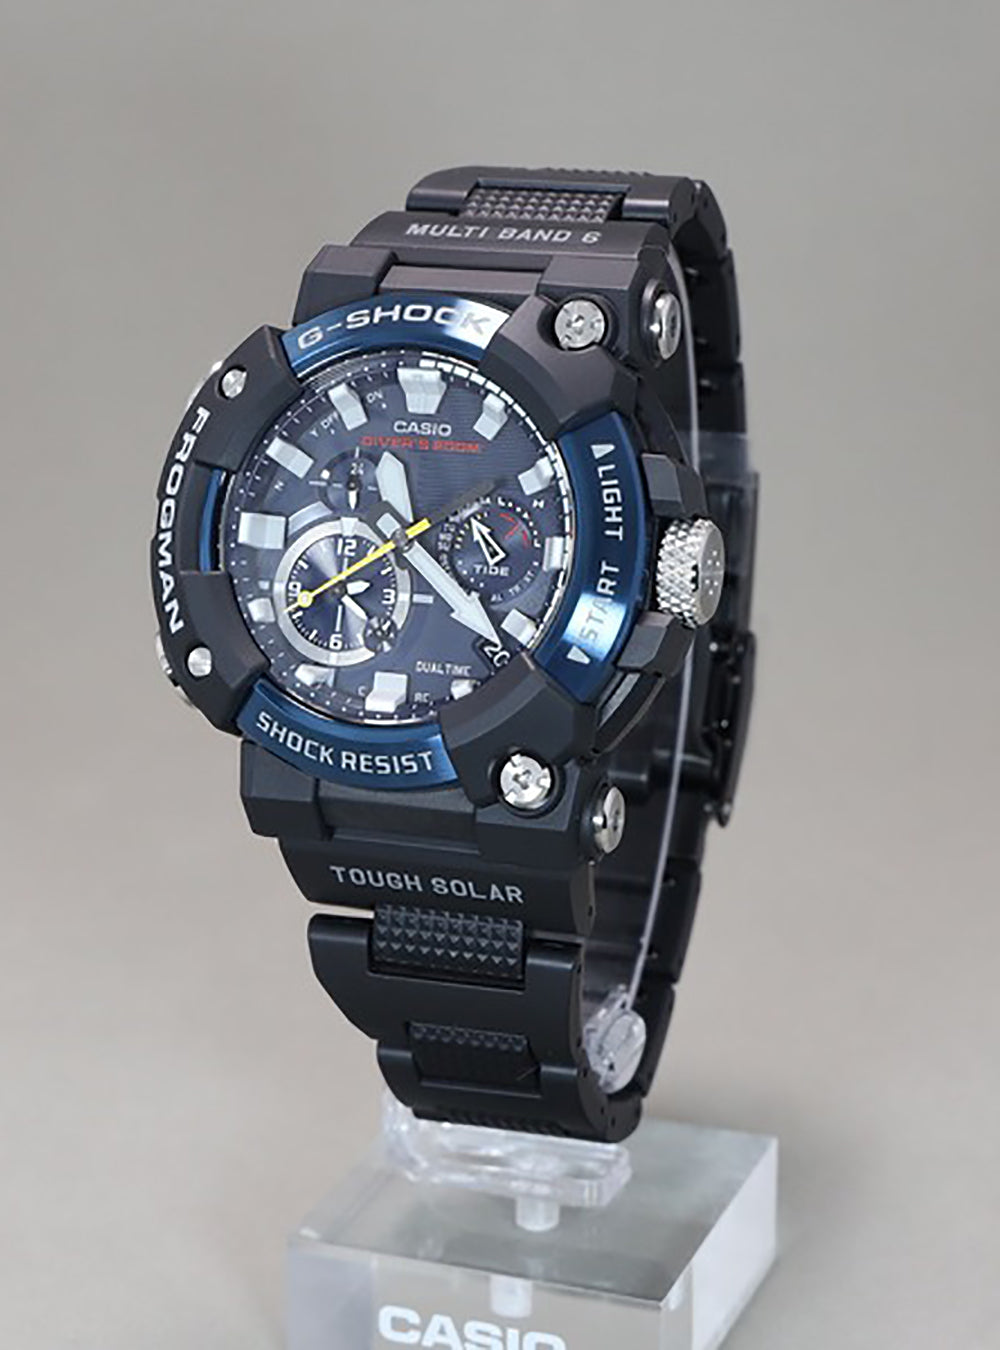 CASIO G-SHOCK MASTER OF G SEA FROGMAN GWF-A1000C-1AJF – japan-select